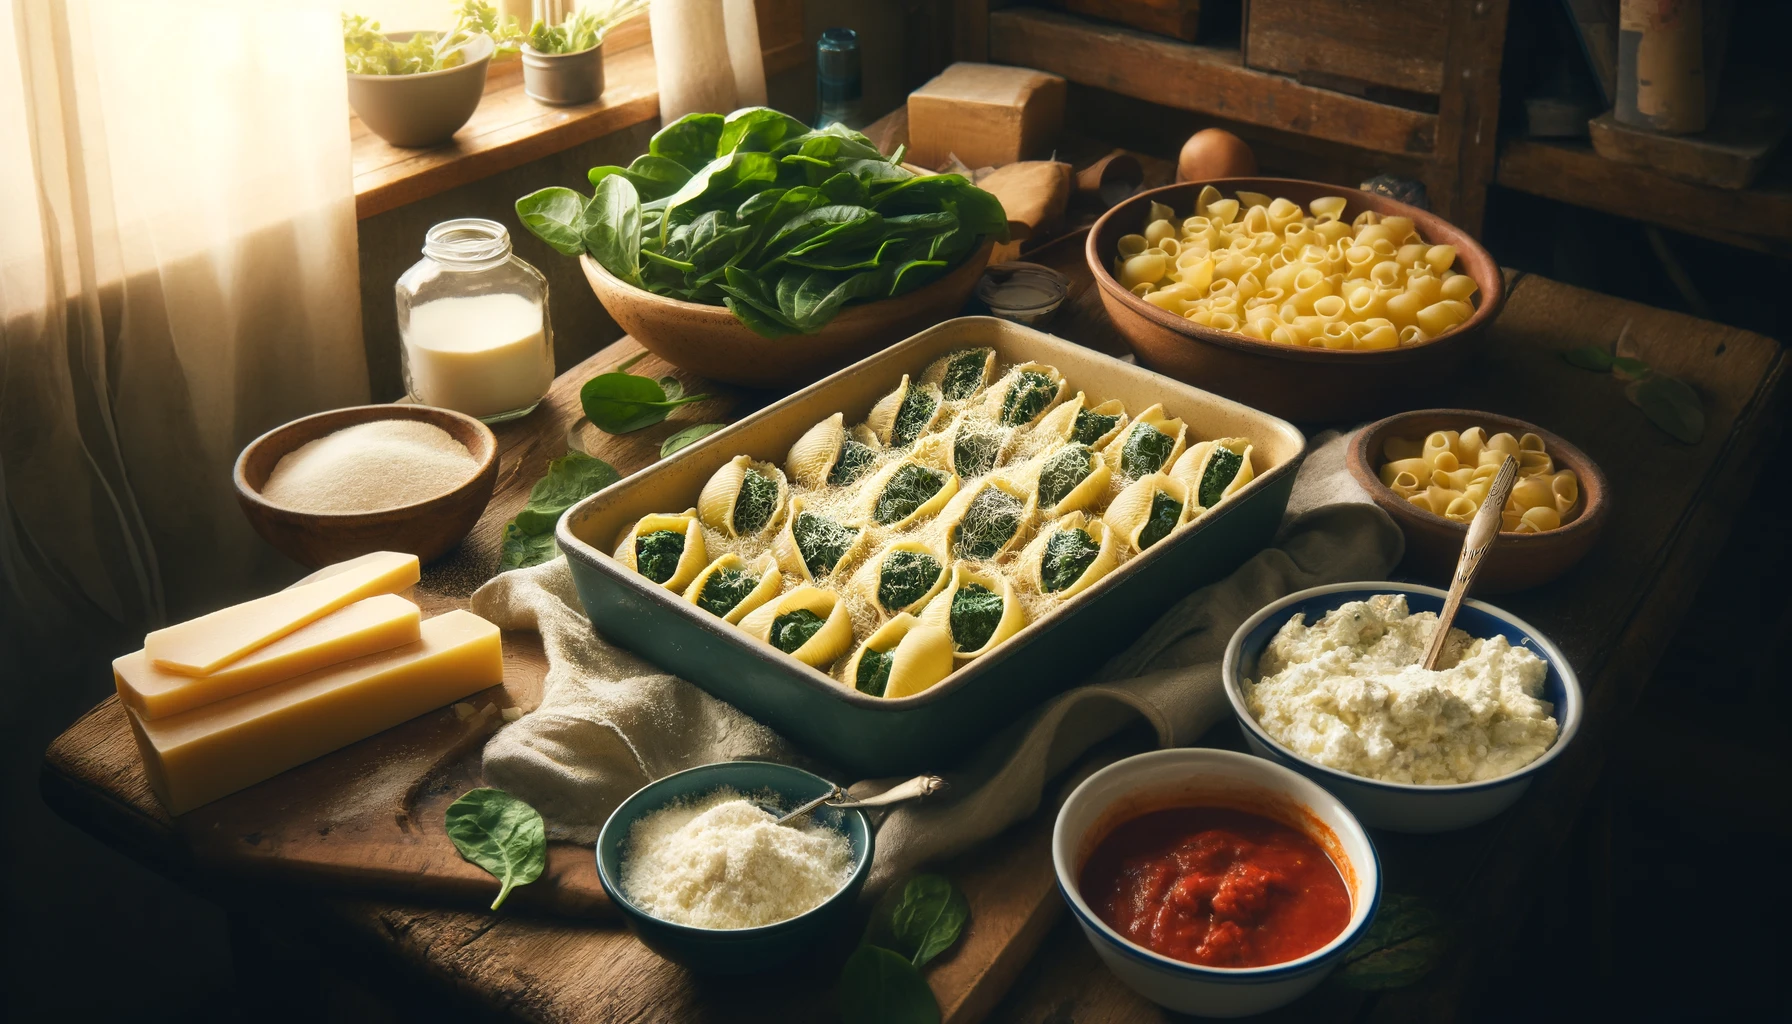 dall·e 2024 04 26 15.14.02 a cozy kitchen scene featuring the preparation of spinach and ricotta stuffed pasta shells. the image shows a large rustic wooden table with ingredie